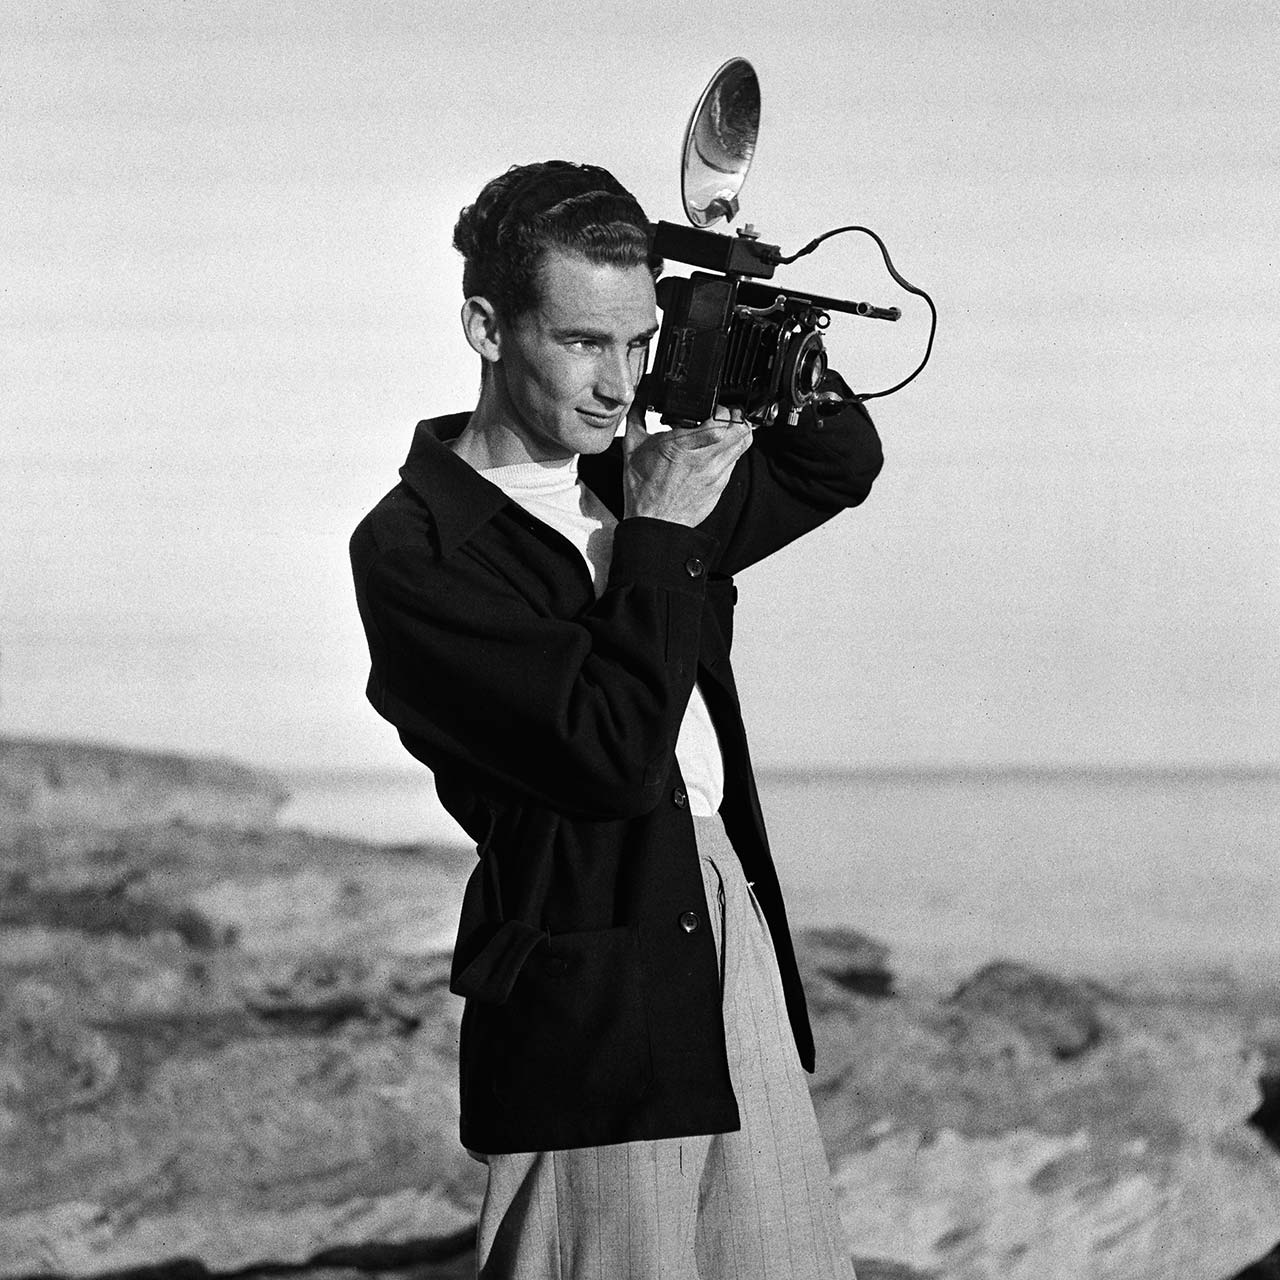 George with Voigtländer Bergheil camera, with roll film back and flashgun, 30 June 1940. (Digital ID: a2391049)